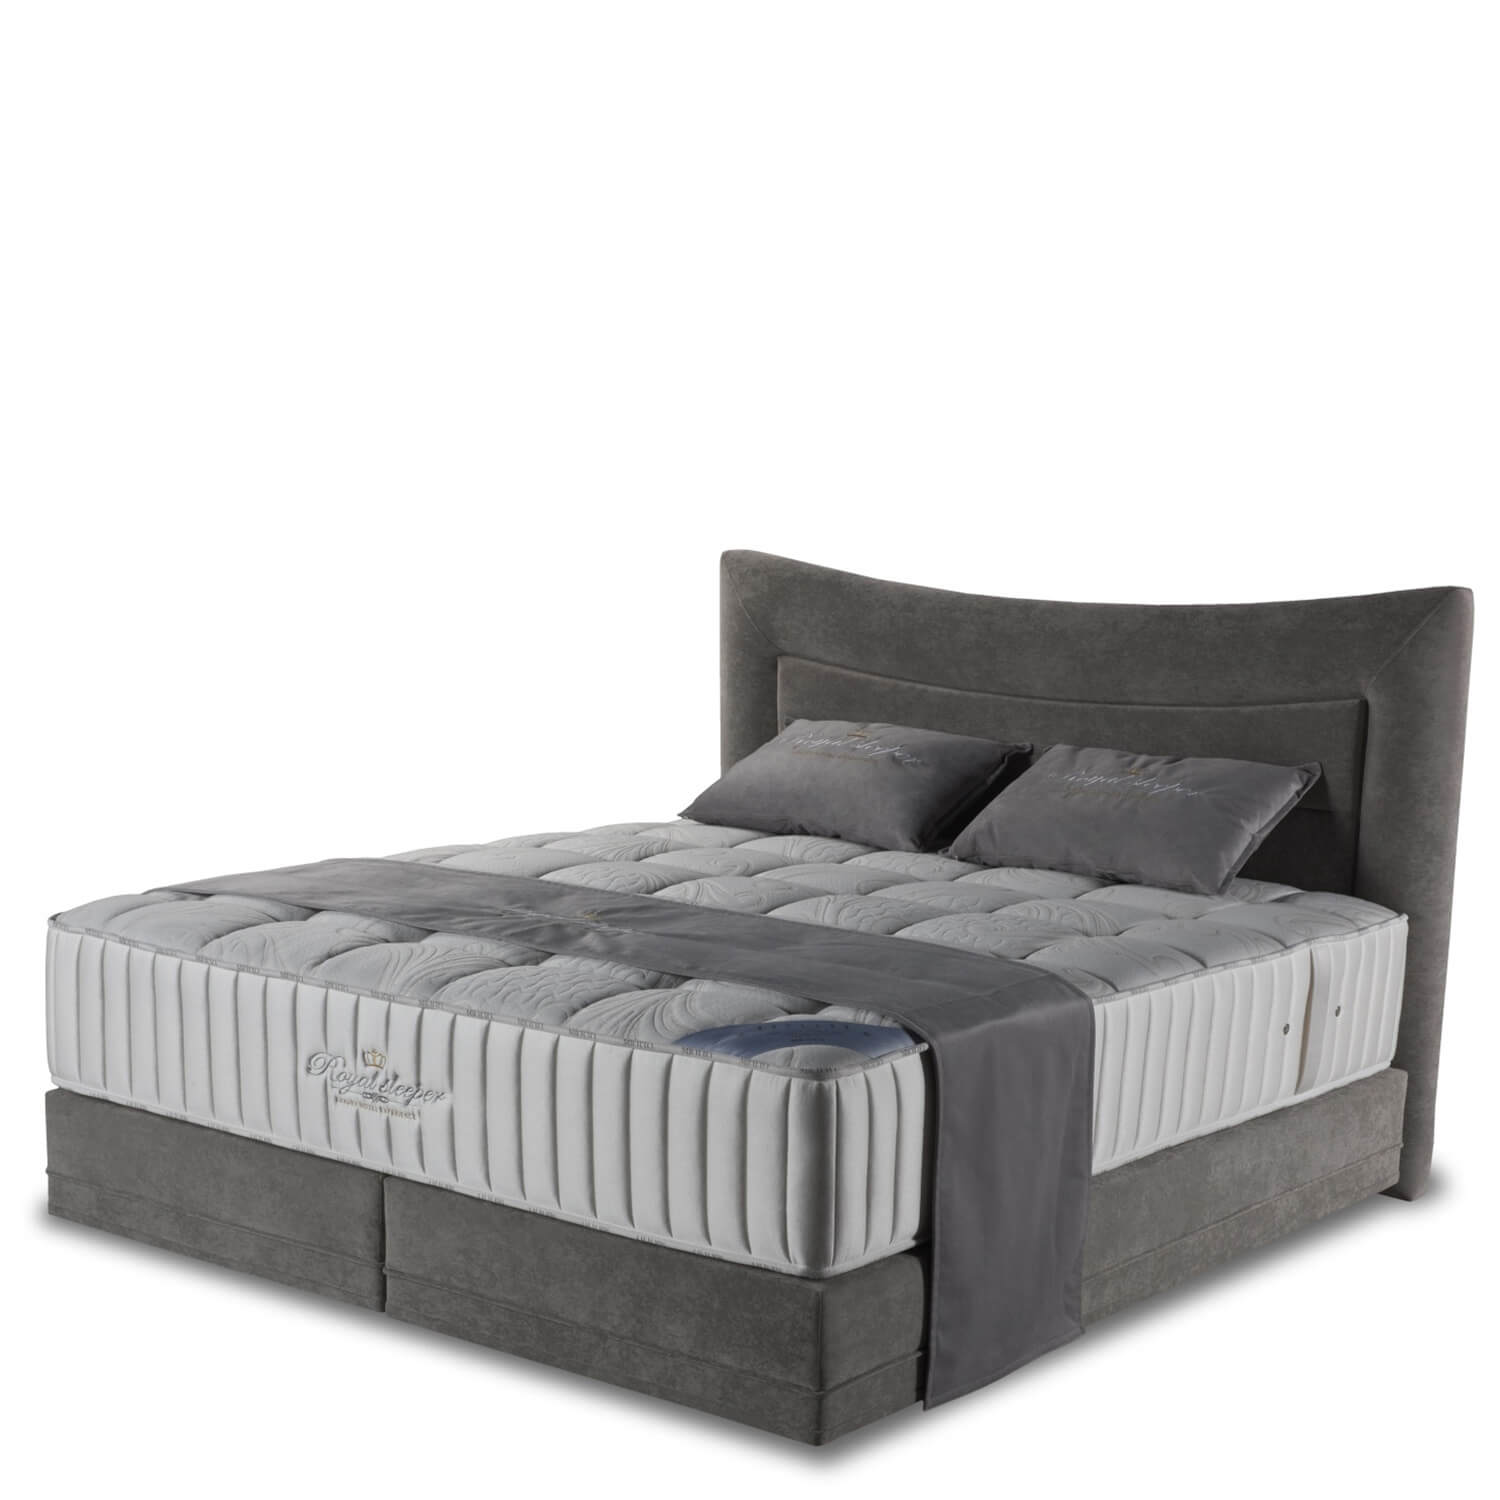 Delling bed